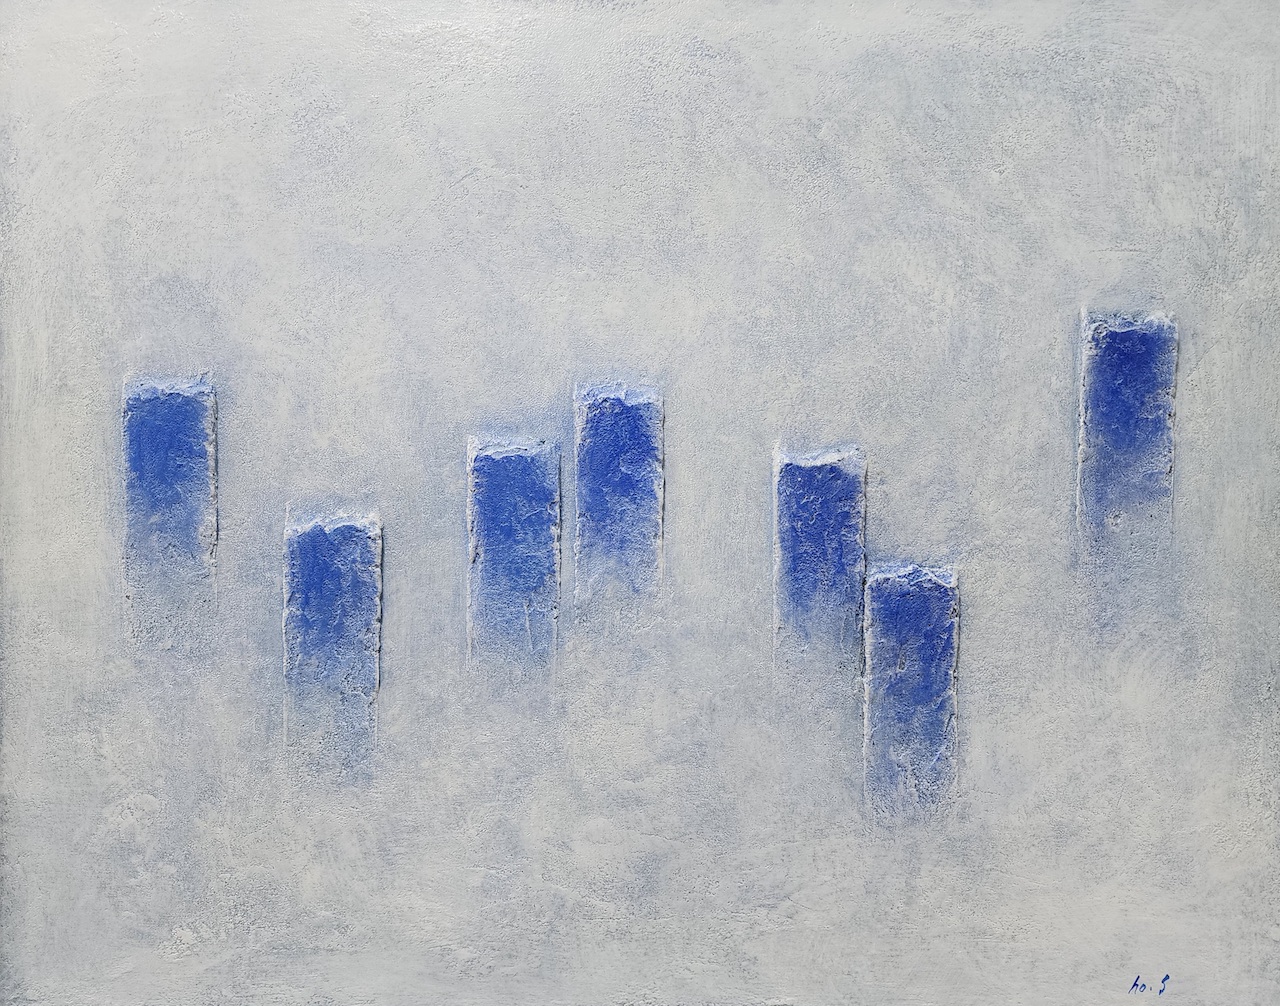 A rectangular artwork with background of white and blue detailed brushstrokes, with 7 blue rectangular block with brushstrokes locating in organic forms 